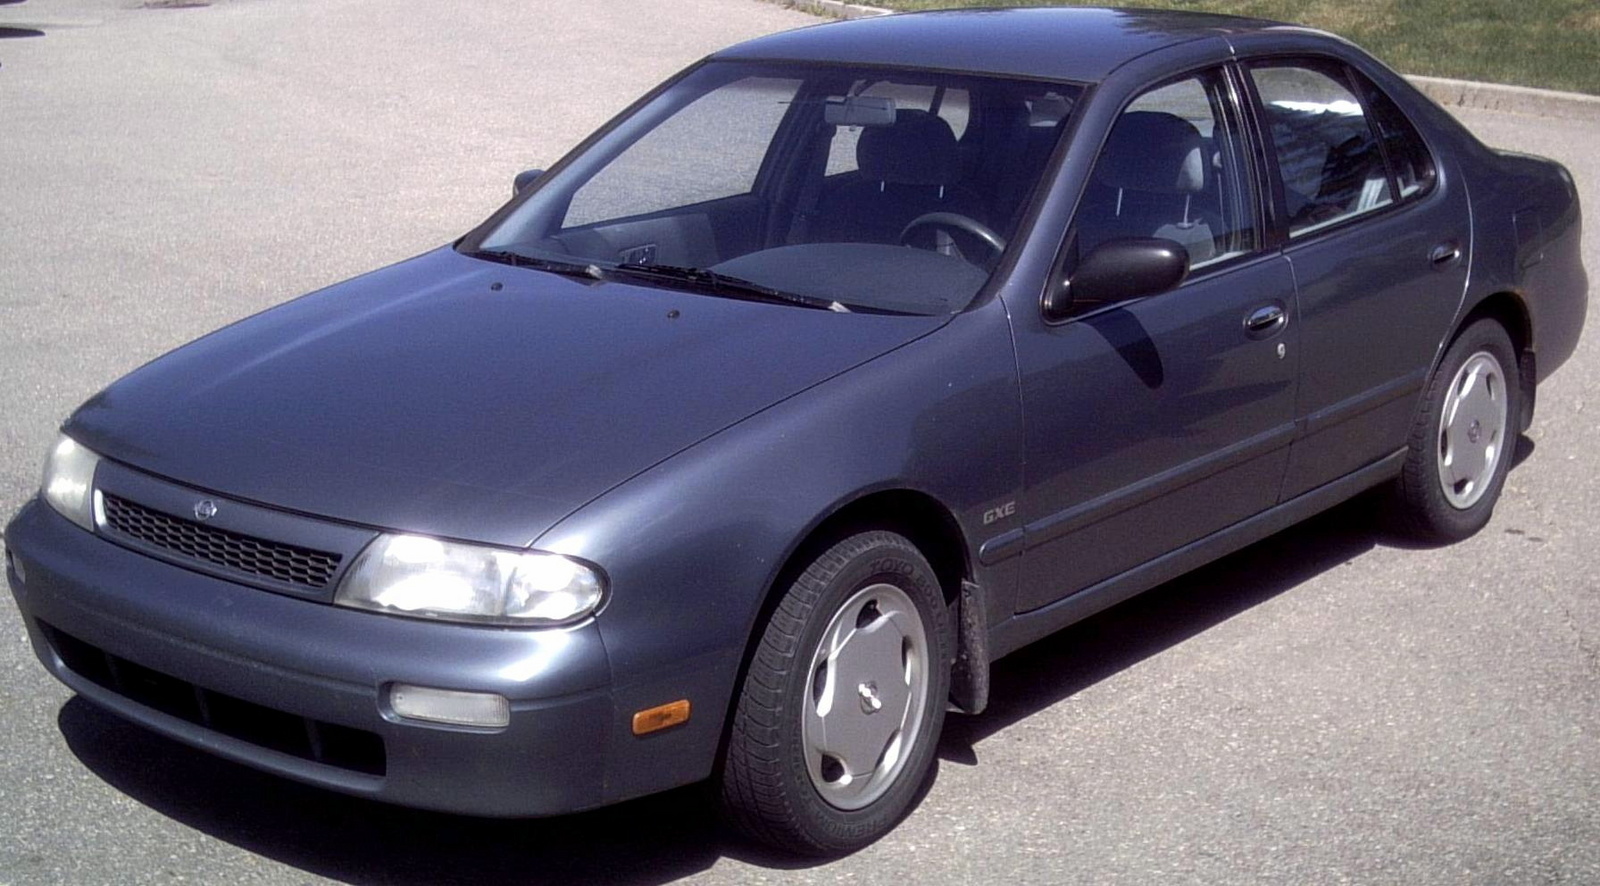 1994 Nissan altima gxe review #8